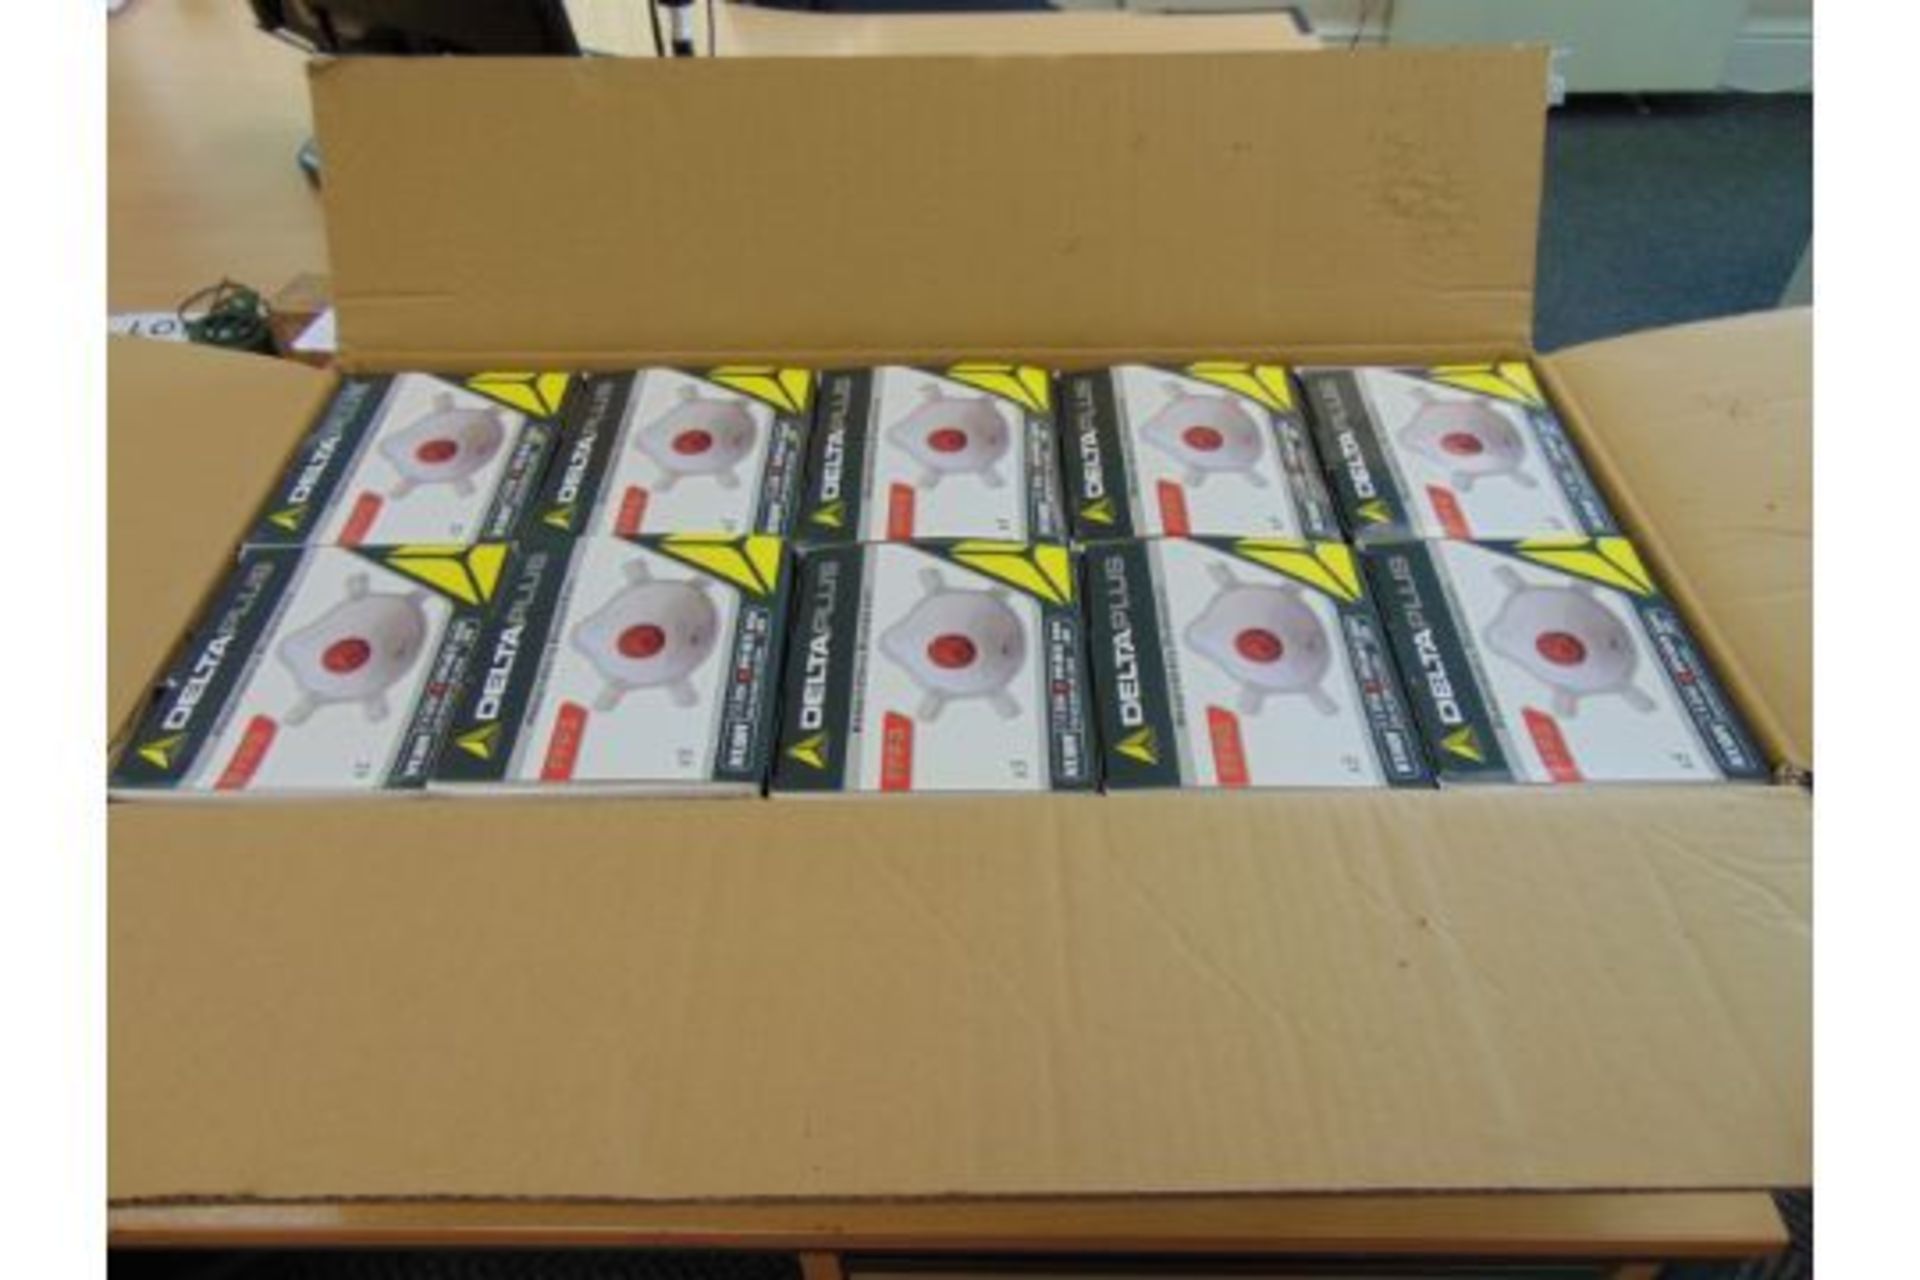 1 PALLET OF 1200 NEW UNUSED DELTA PLUS HIGH QUALITY DUST RESPIRATOR MASKS CE MARKED WITH VALVE - Image 3 of 8